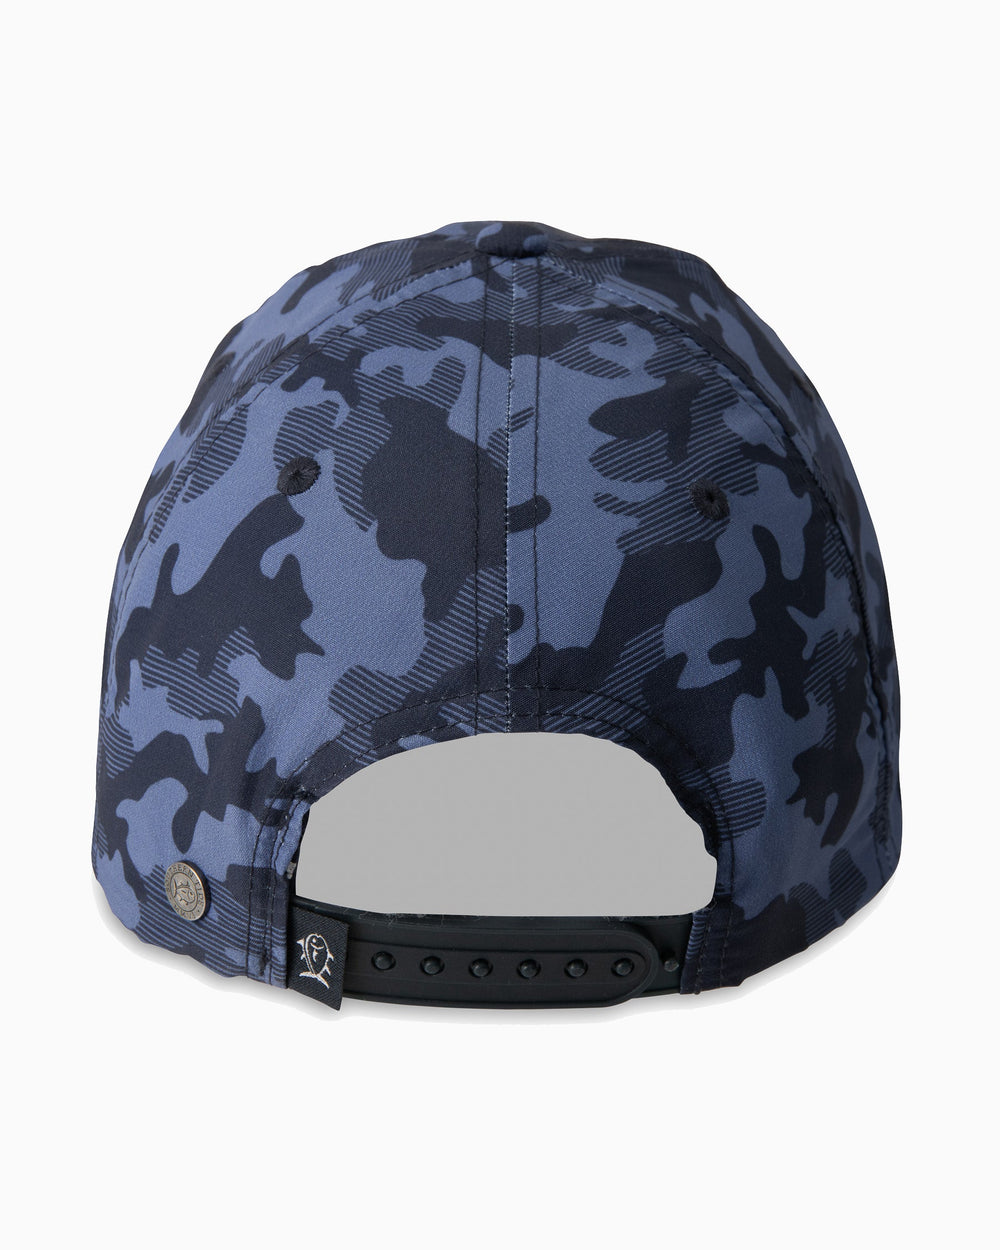 The back of the Camo Printed Performance Hat by Southern Tide - True Navy